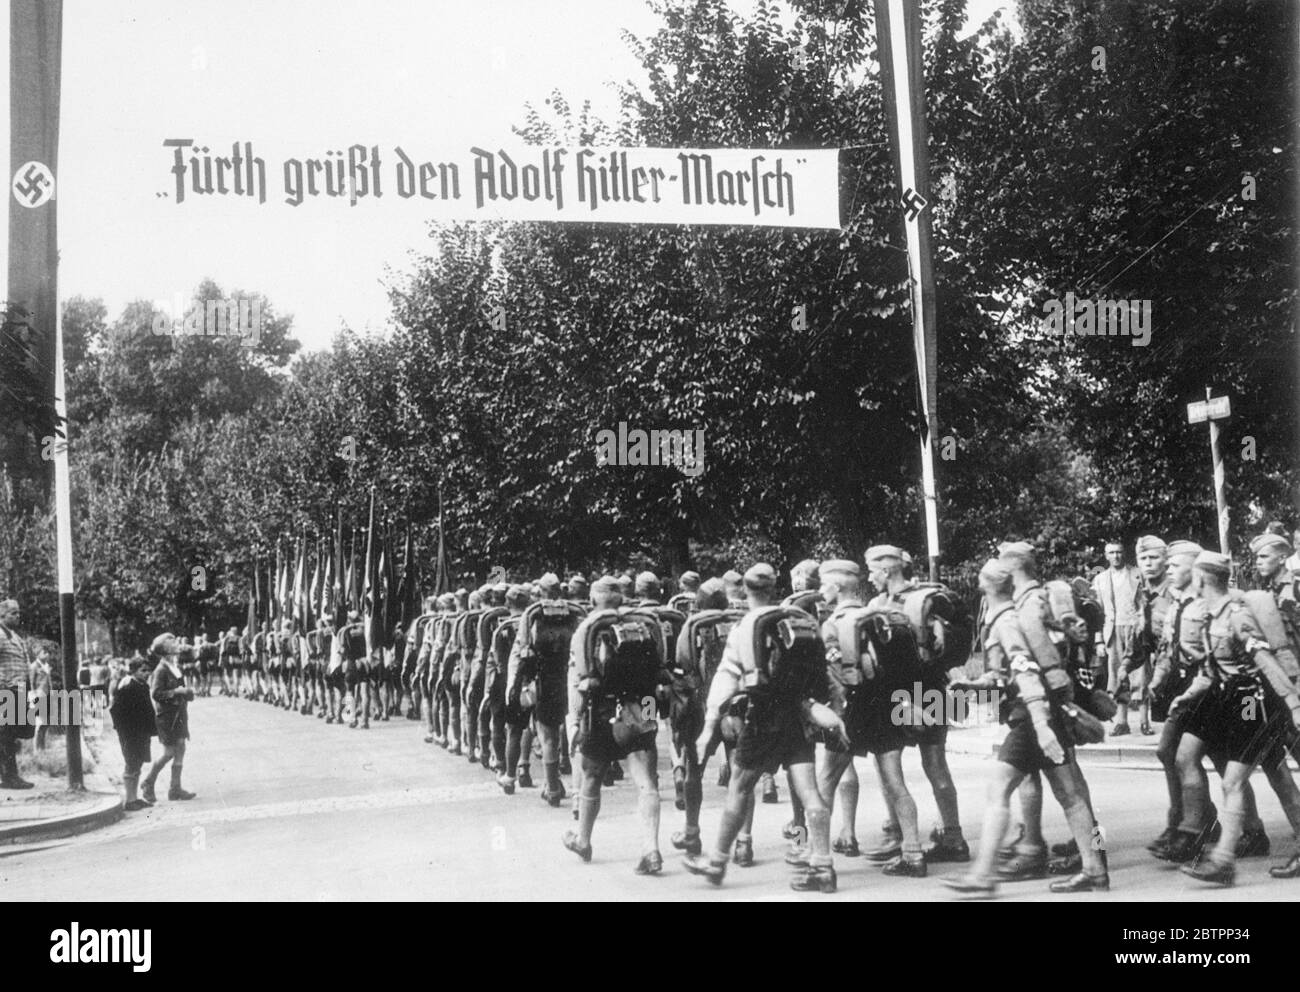 The end of the march. A column of Hitler youth marching into Furth, near Nuremberg, as they completed the 'Hitler. March'in time for the Nazi party Congress, opening at Nuremberg today (Monday). The banner across the street reads 'Furth greets the Adolf Hitler March'. 5 September 1938 Stock Photo